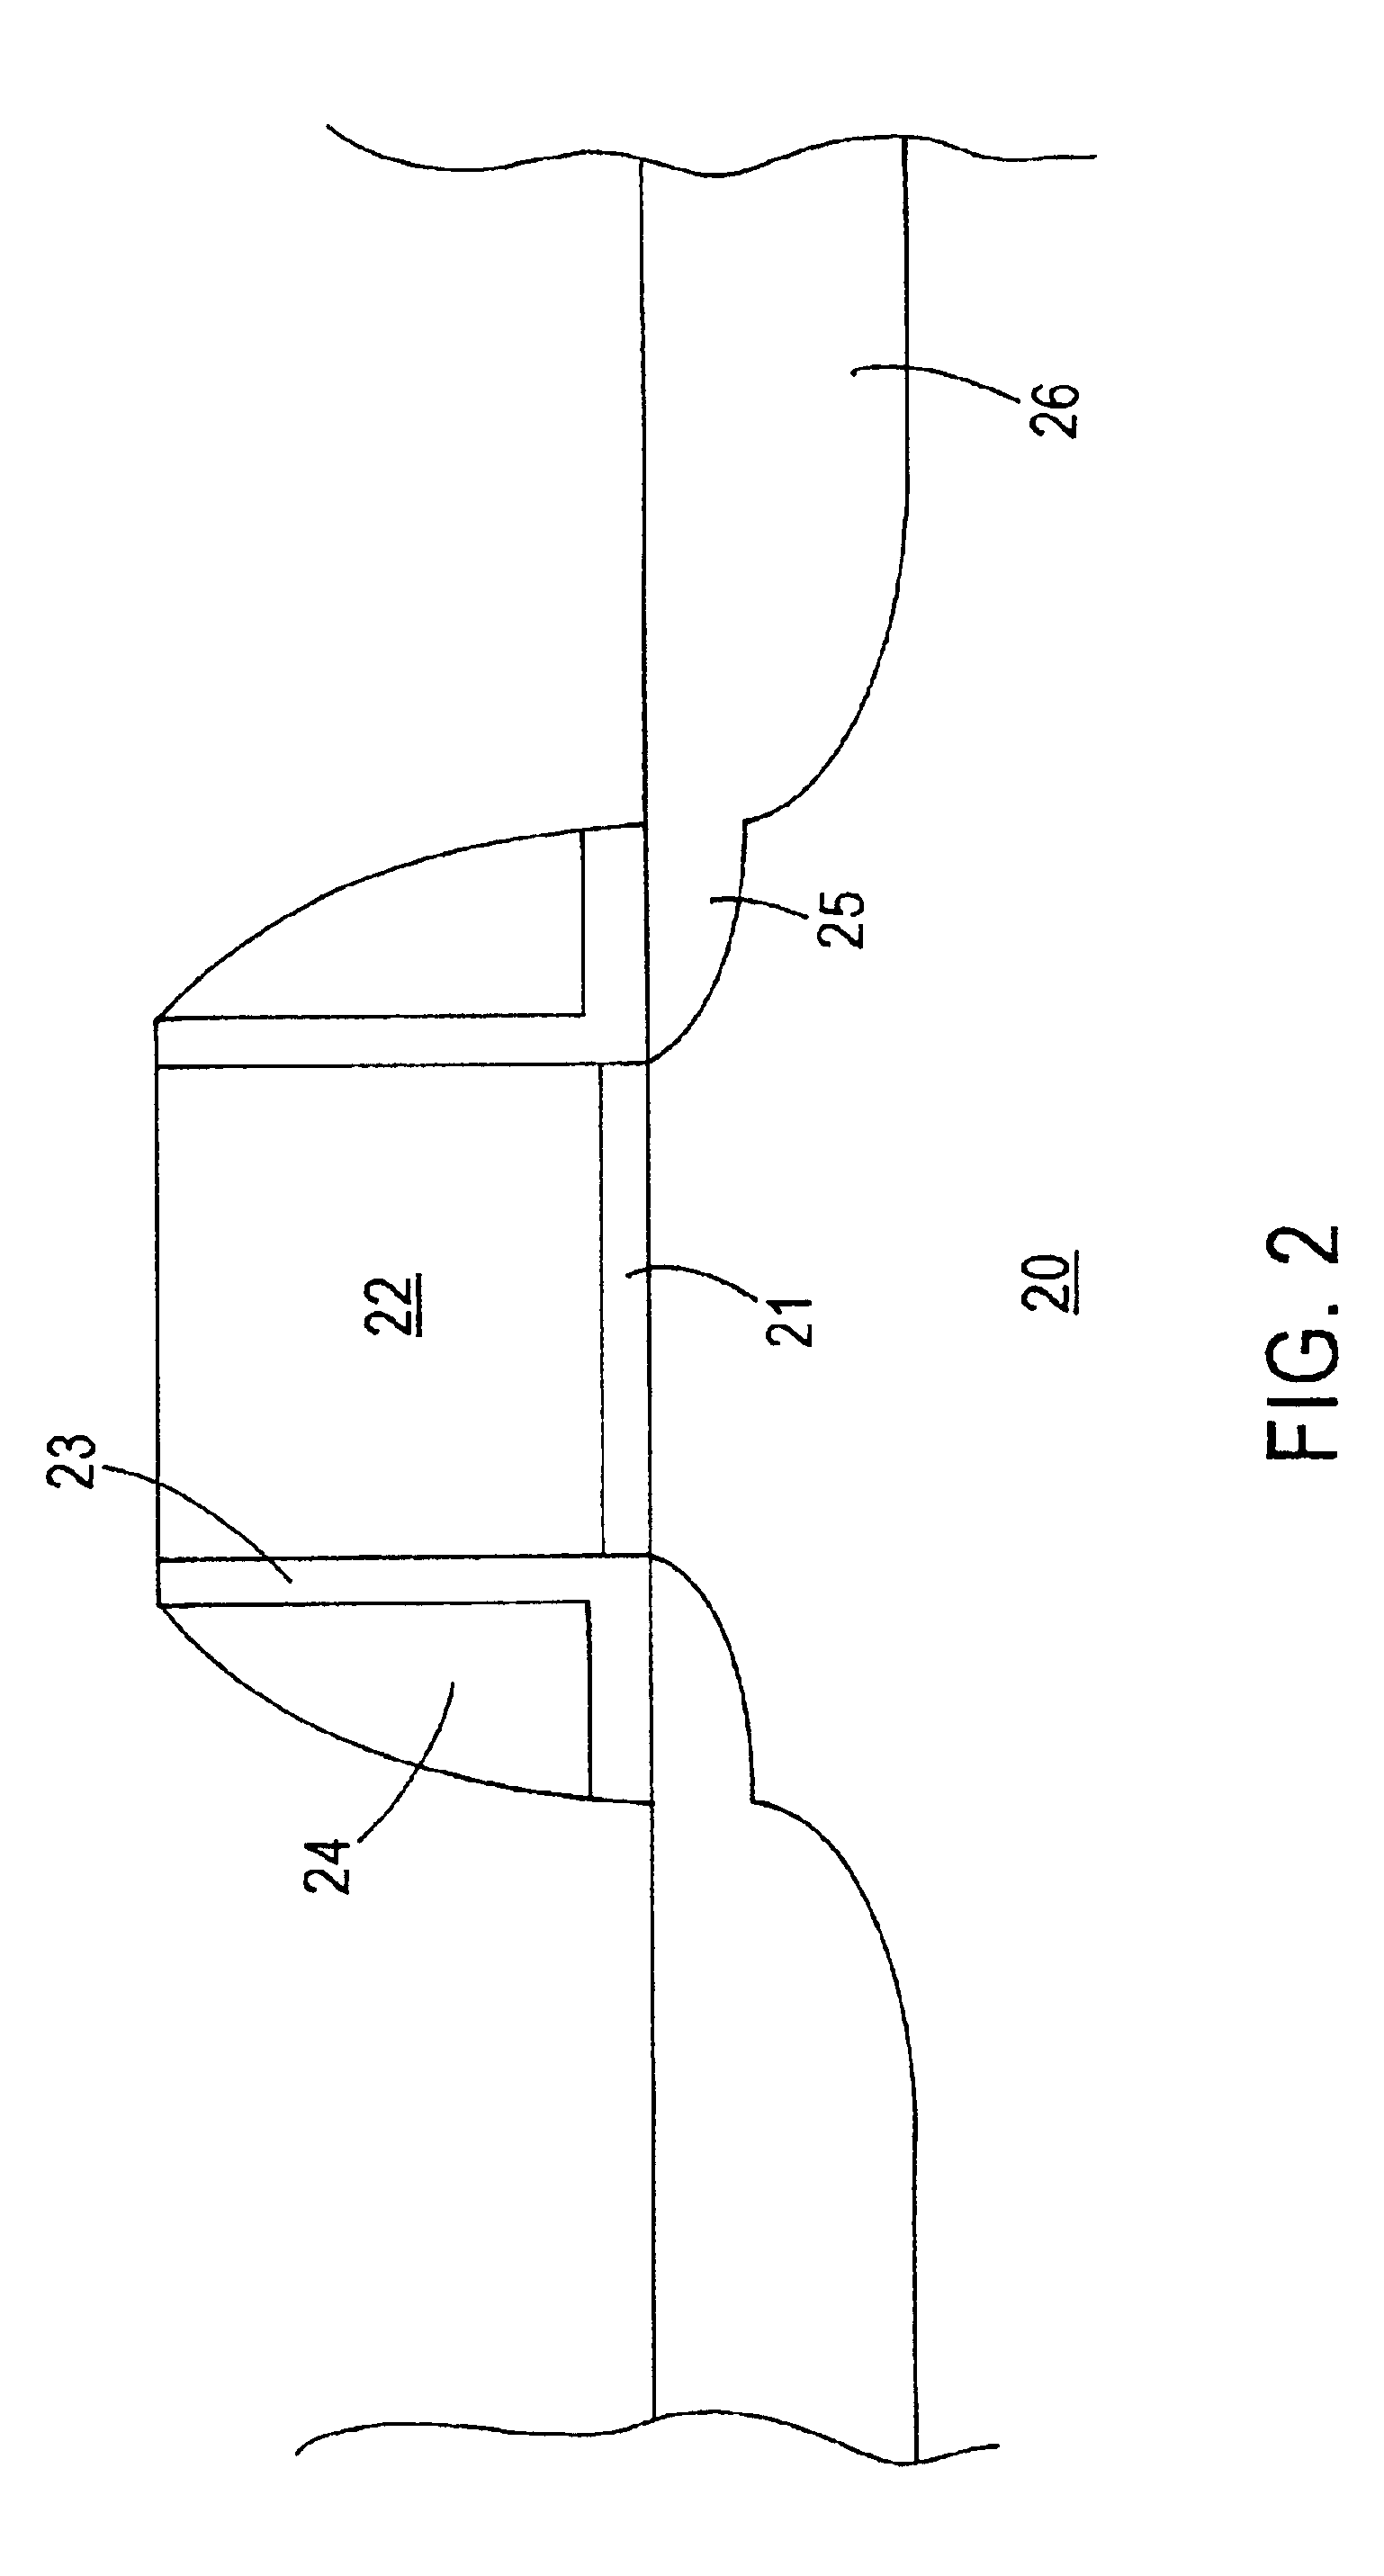 Nickel silicide with reduced interface roughness